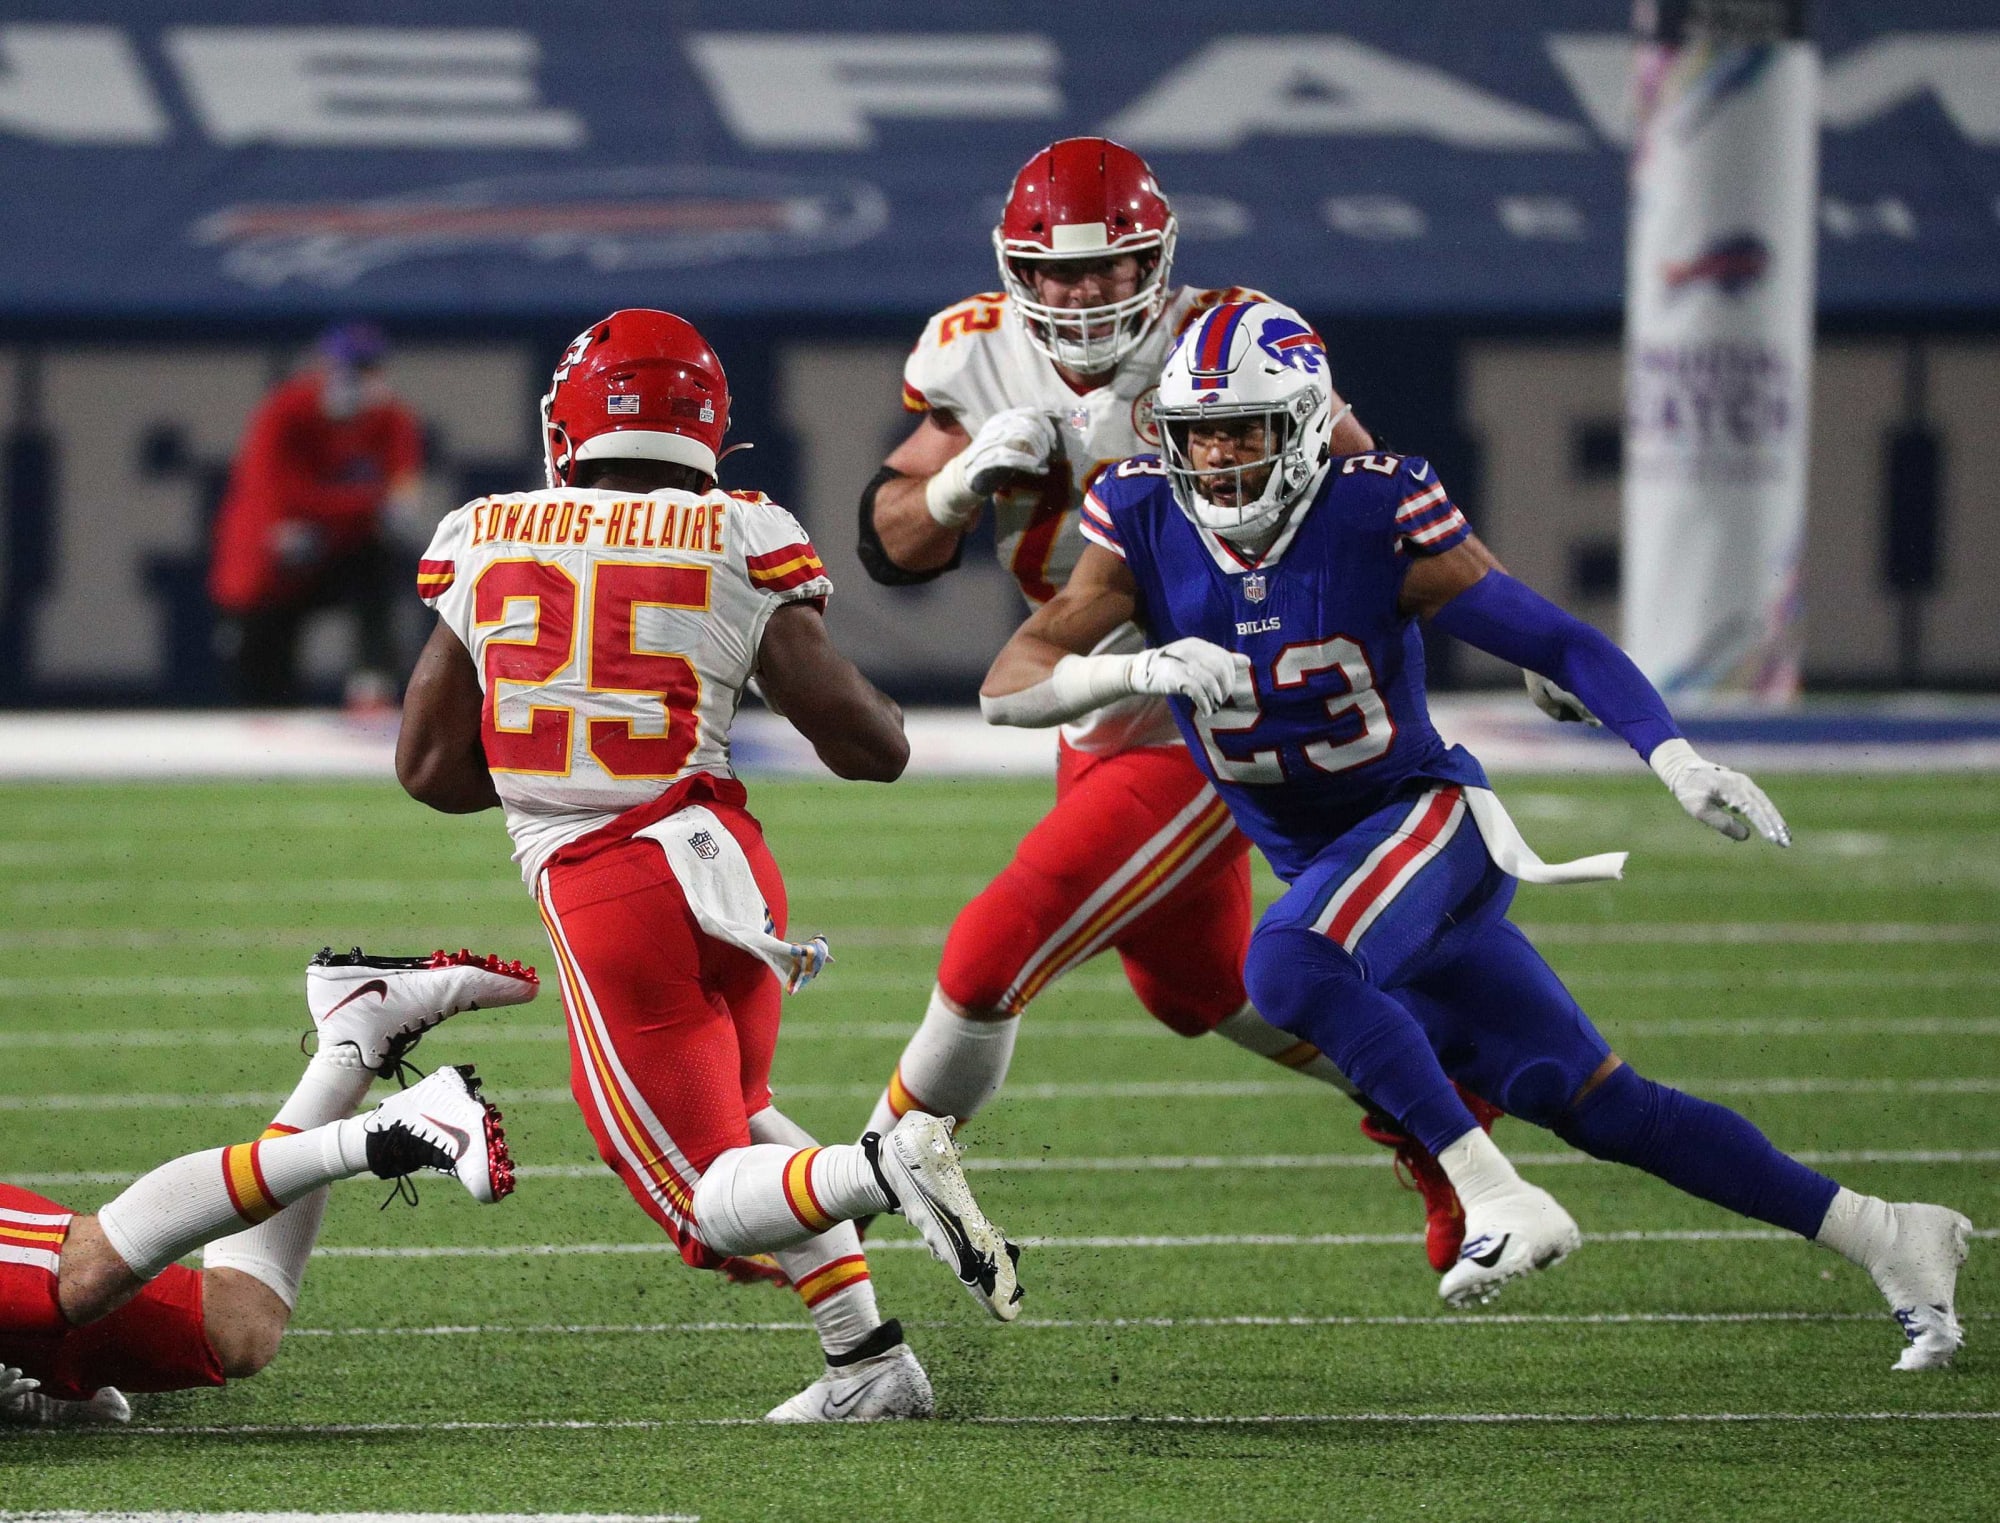 Kansas City Chiefs showed they can win games by running the ball